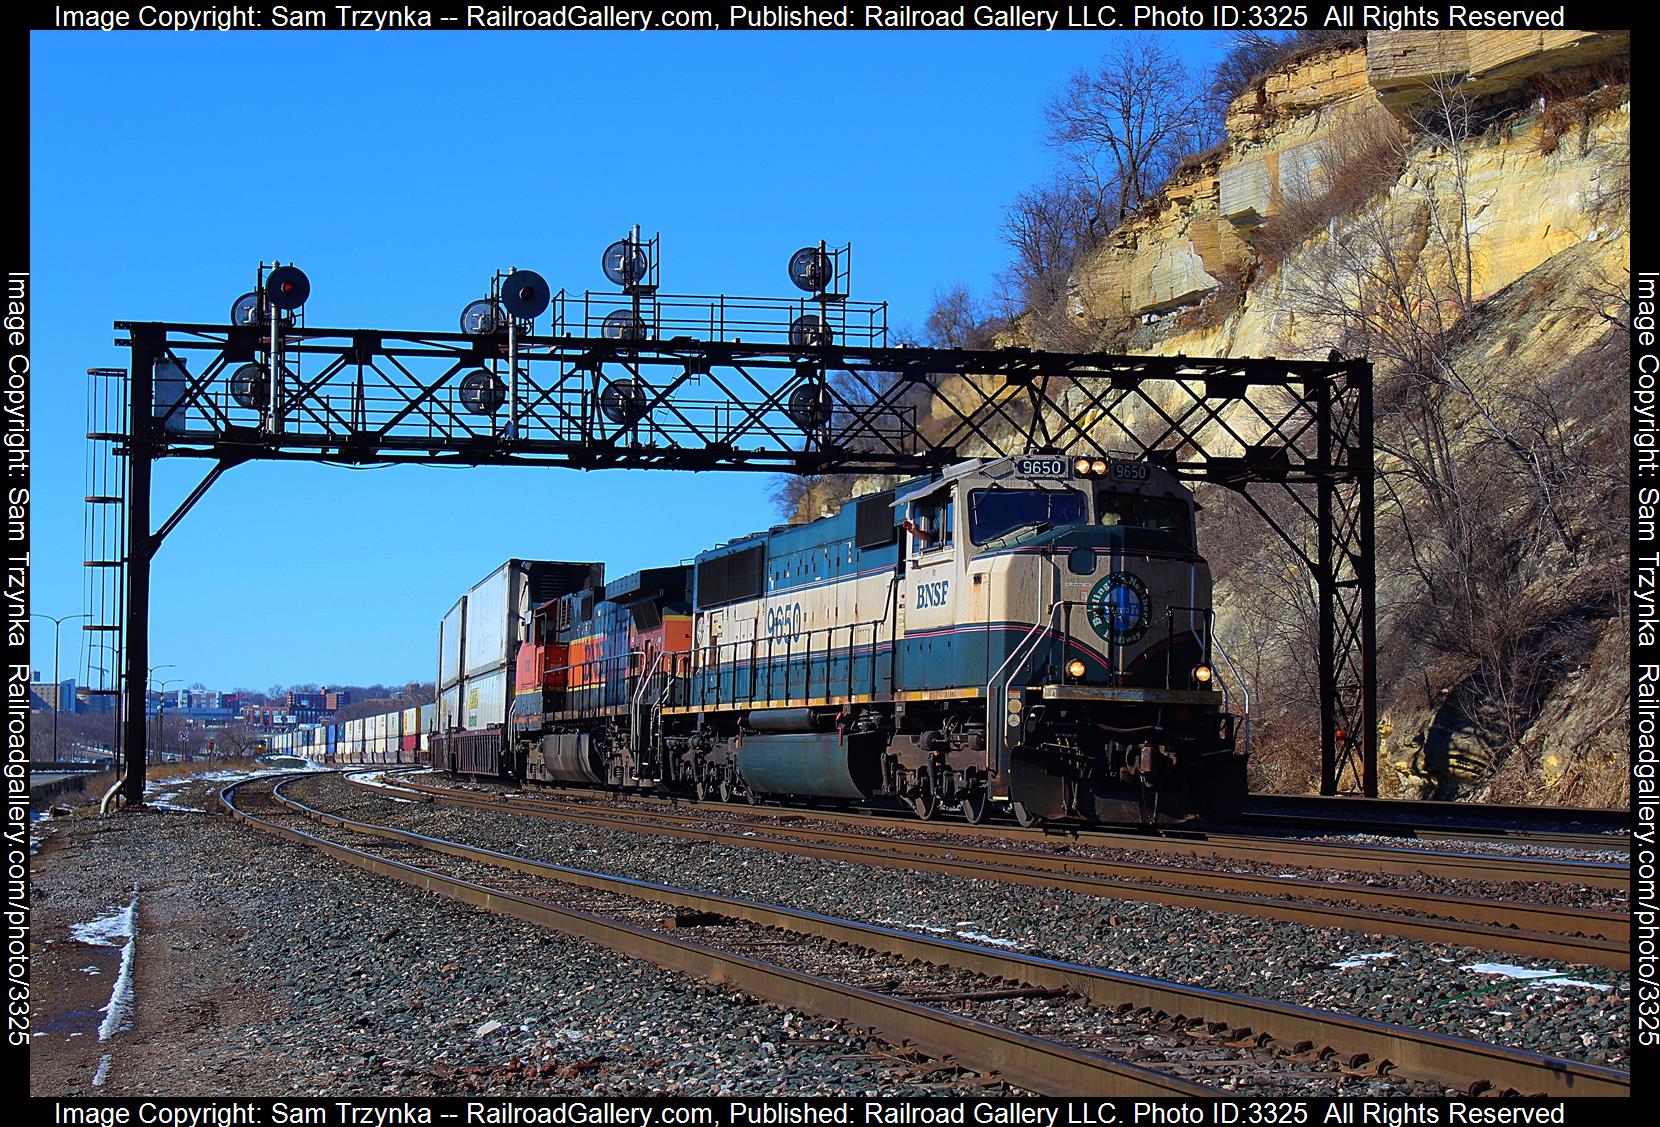 BNSF 9650 is a class EMD SD70MAC and  is pictured in St. Paul, Minnesota, USA.  This was taken along the BNSF St. Paul Subdivision on the BNSF Railway. Photo Copyright: Sam Trzynka uploaded to Railroad Gallery on 04/25/2024. This photograph of BNSF 9650 was taken on Sunday, February 18, 2024. All Rights Reserved. 